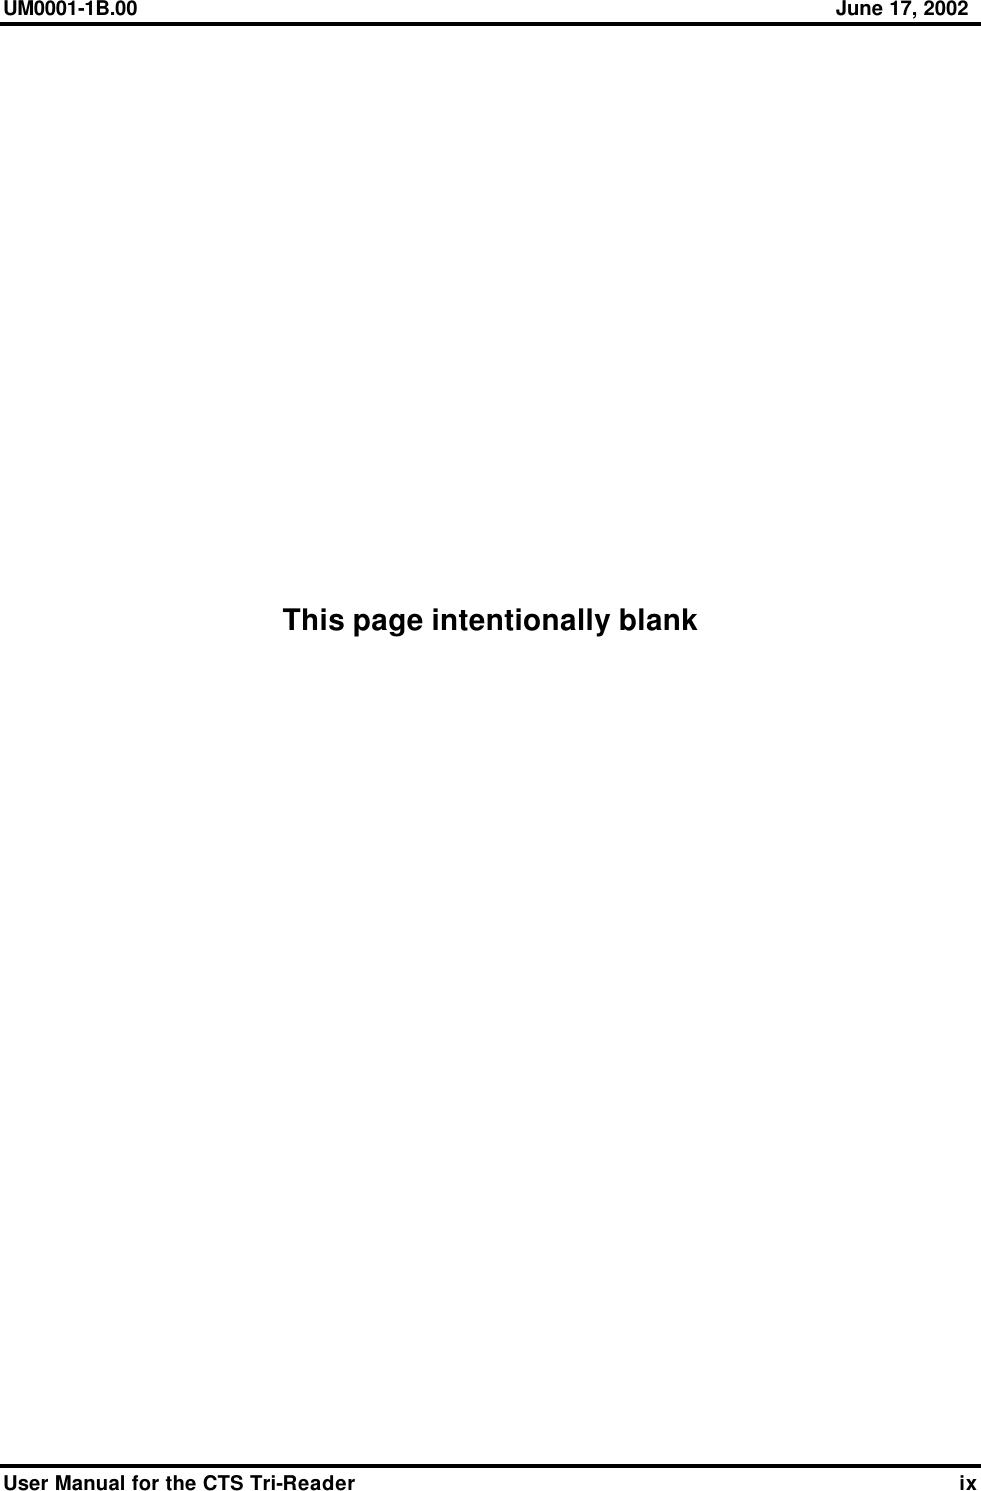 UM0001-1B.00 June 17, 2002 User Manual for the CTS Tri-Reader ix                  This page intentionally blank    